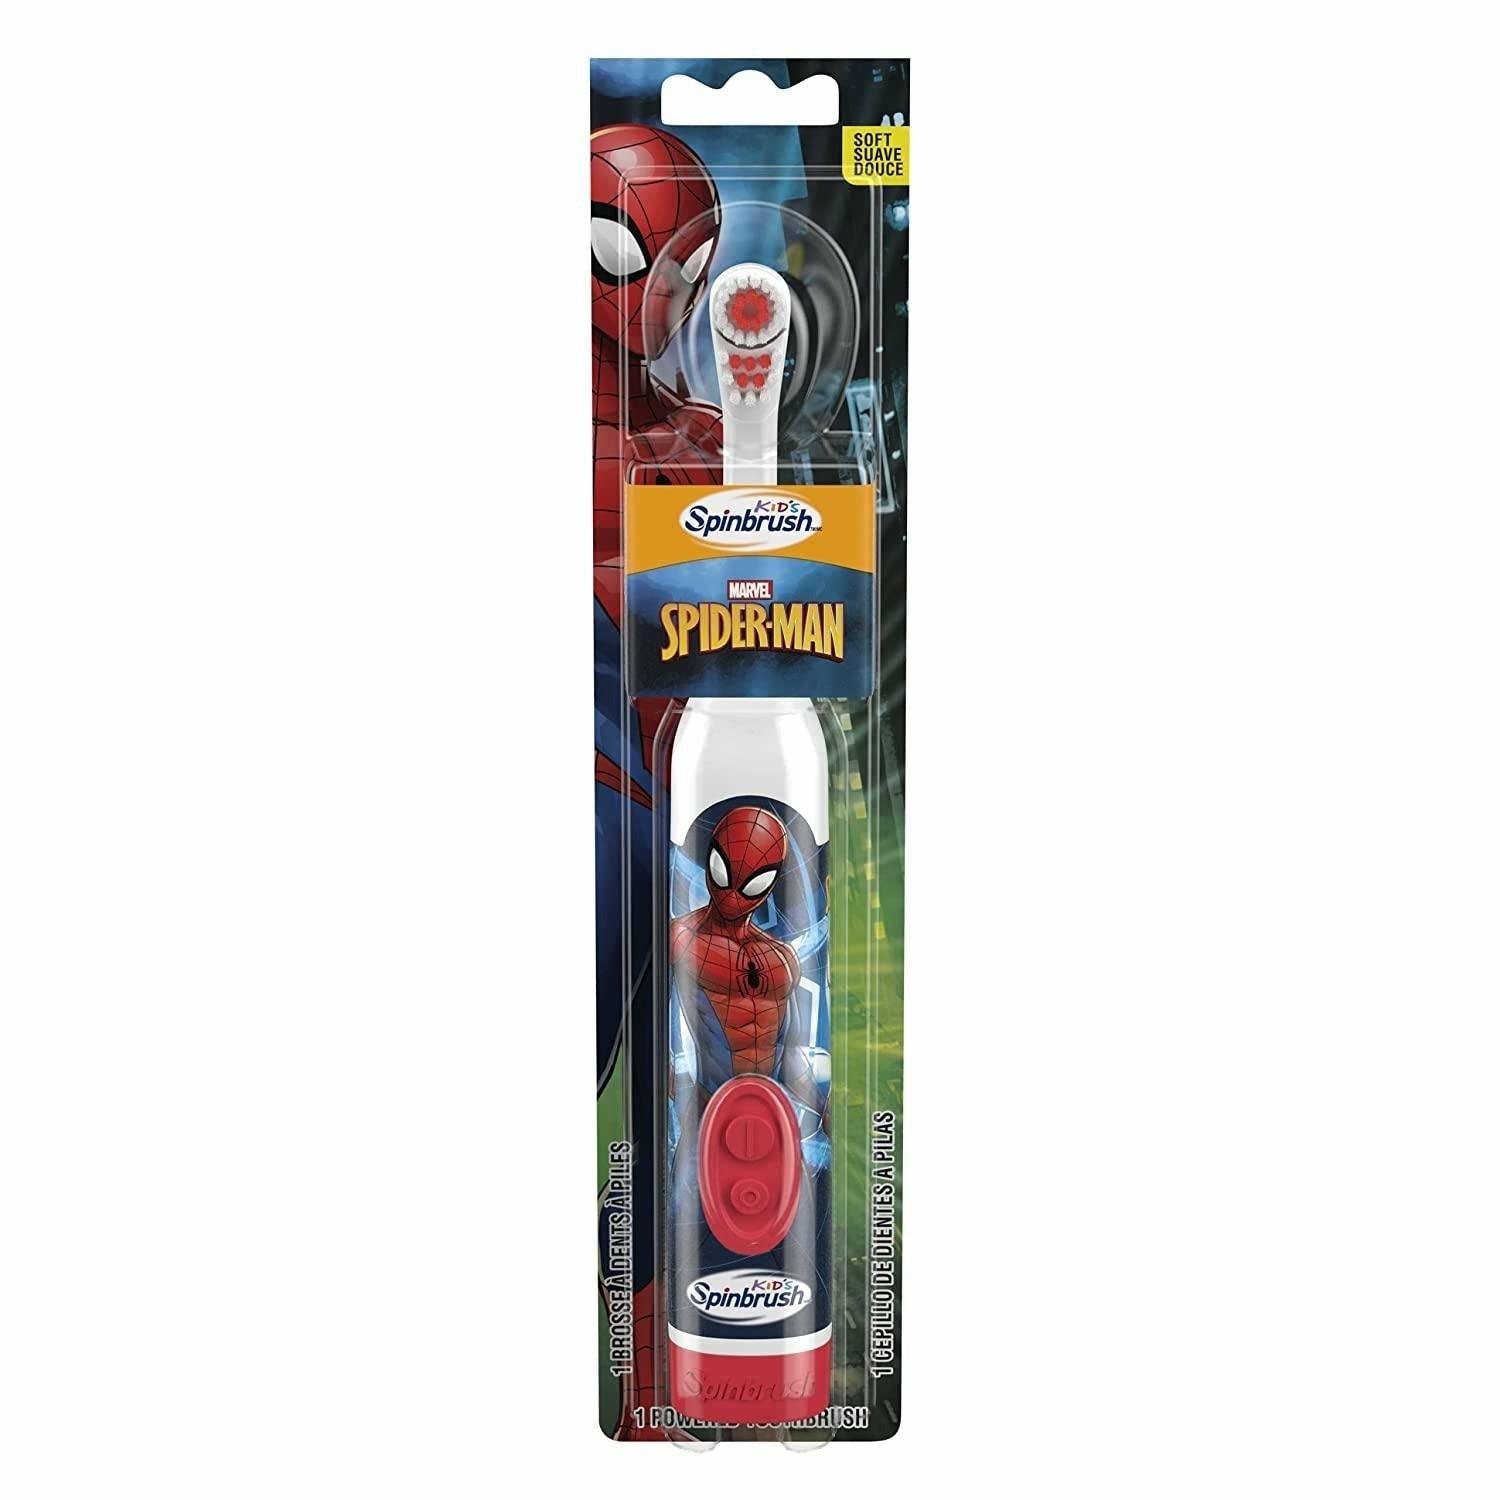 Arm & Hammer Kid's Spinbrush Spiderman Powered Toothbrush, 1 count - BumbleToys - 5-7 Years, 8-13 Years, Baby Saftey & Health, Boys, Spider man, Spiderman